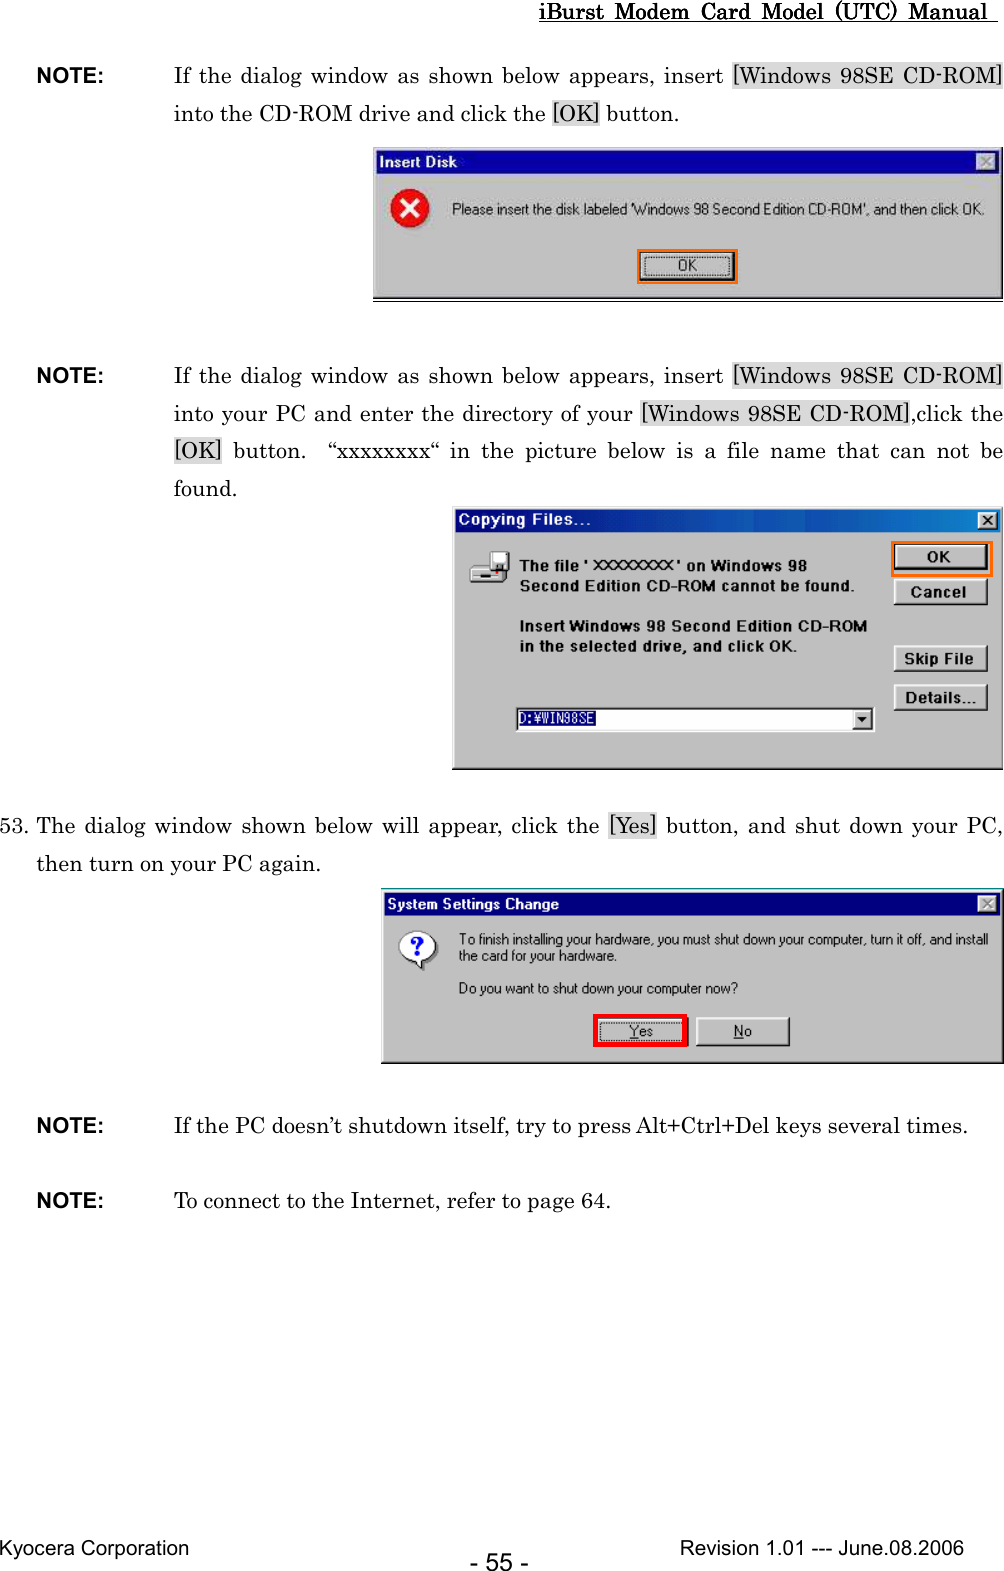 iBurst  Modem  Card  Model  (UTC)  Manual iBurst  Modem  Card  Model  (UTC)  Manual iBurst  Modem  Card  Model  (UTC)  Manual iBurst  Modem  Card  Model  (UTC)  Manual       Kyocera Corporation                                                                                              Revision 1.01 --- June.08.2006 - 55 - NOTE:  If the dialog window as shown below appears, insert [Windows 98SE CD-ROM] into the CD-ROM drive and click the [OK] button.   NOTE:  If the dialog window as shown below appears, insert [Windows 98SE CD-ROM] into your PC and enter the directory of your [Windows 98SE CD-ROM],click the [OK]  button.    “xxxxxxxx“  in  the  picture  below  is  a  file  name  that  can  not  be found.   53. The dialog  window shown below  will appear, click  the [Yes] button, and shut down your PC, then turn on your PC again.   NOTE:  If the PC doesn’t shutdown itself, try to press Alt+Ctrl+Del keys several times.  NOTE:  To connect to the Internet, refer to page 64.  